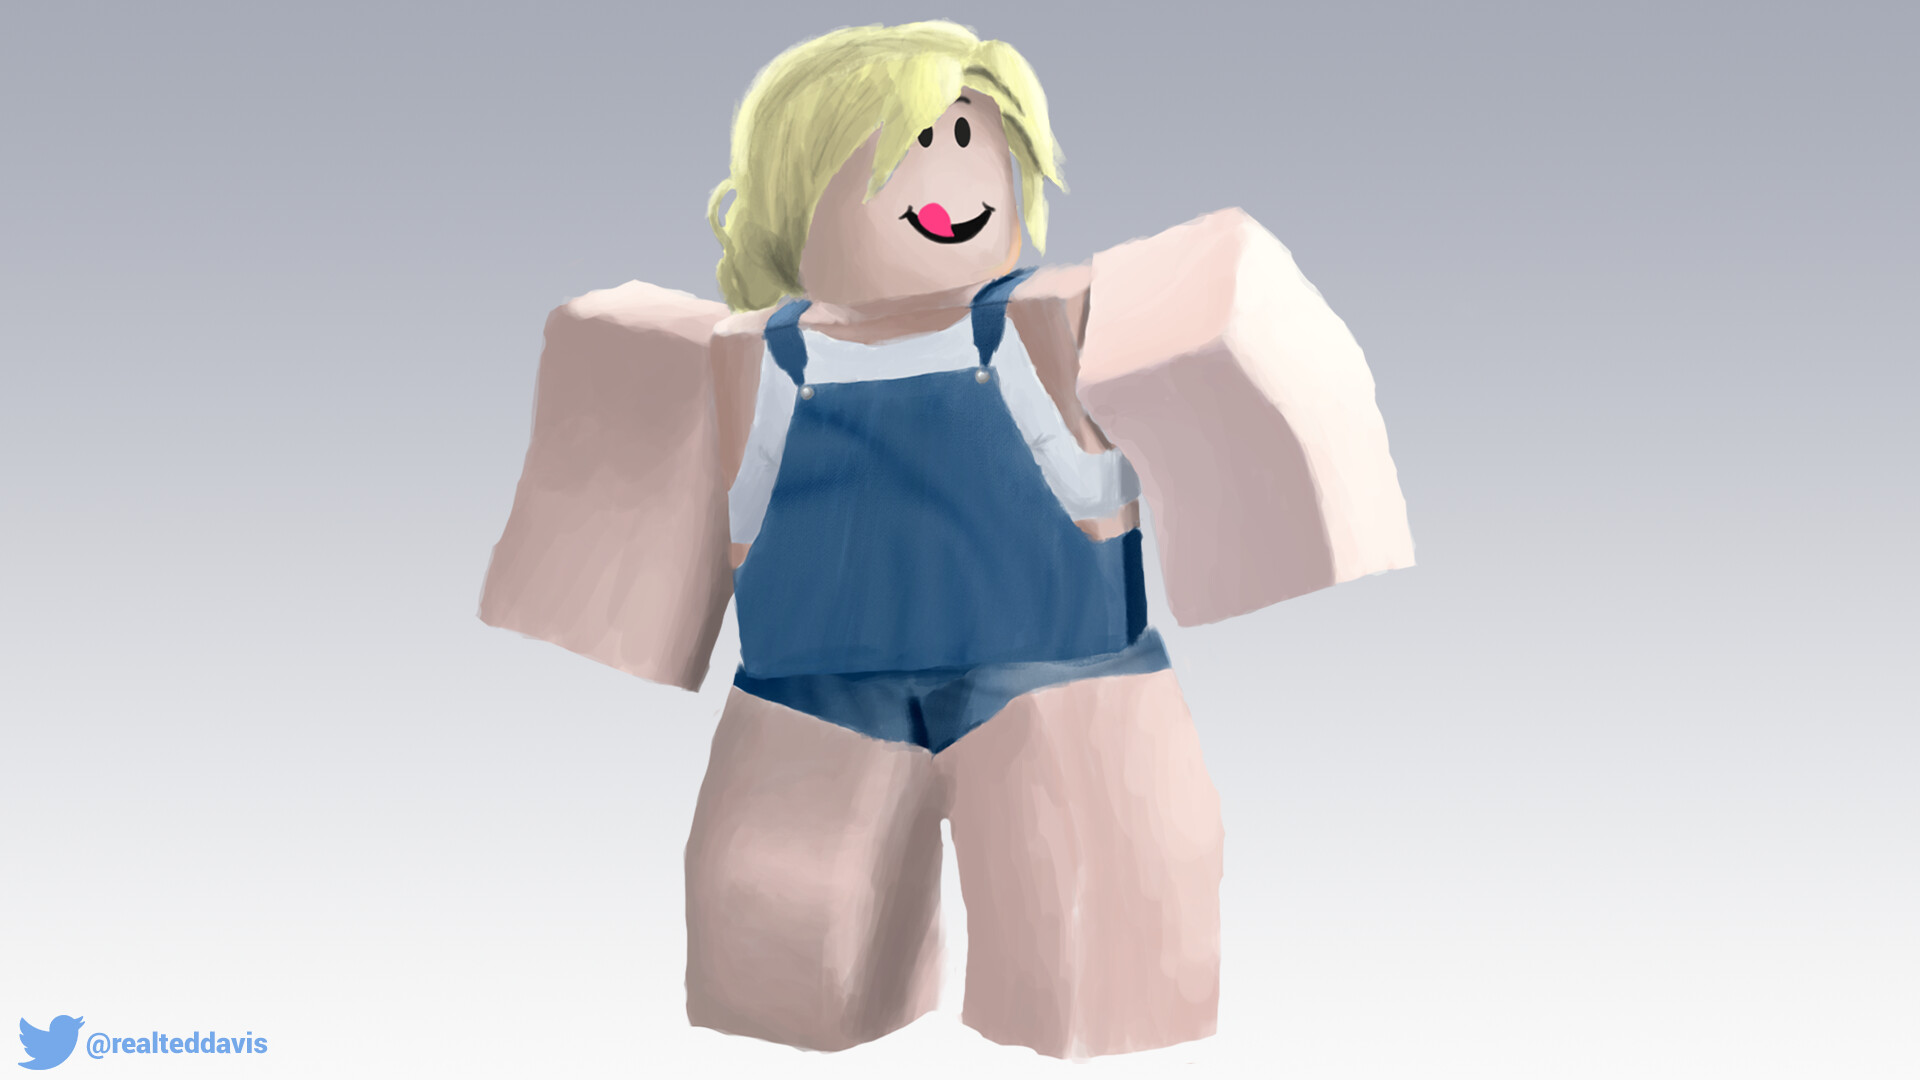 Beautiful Roblox Images Girl